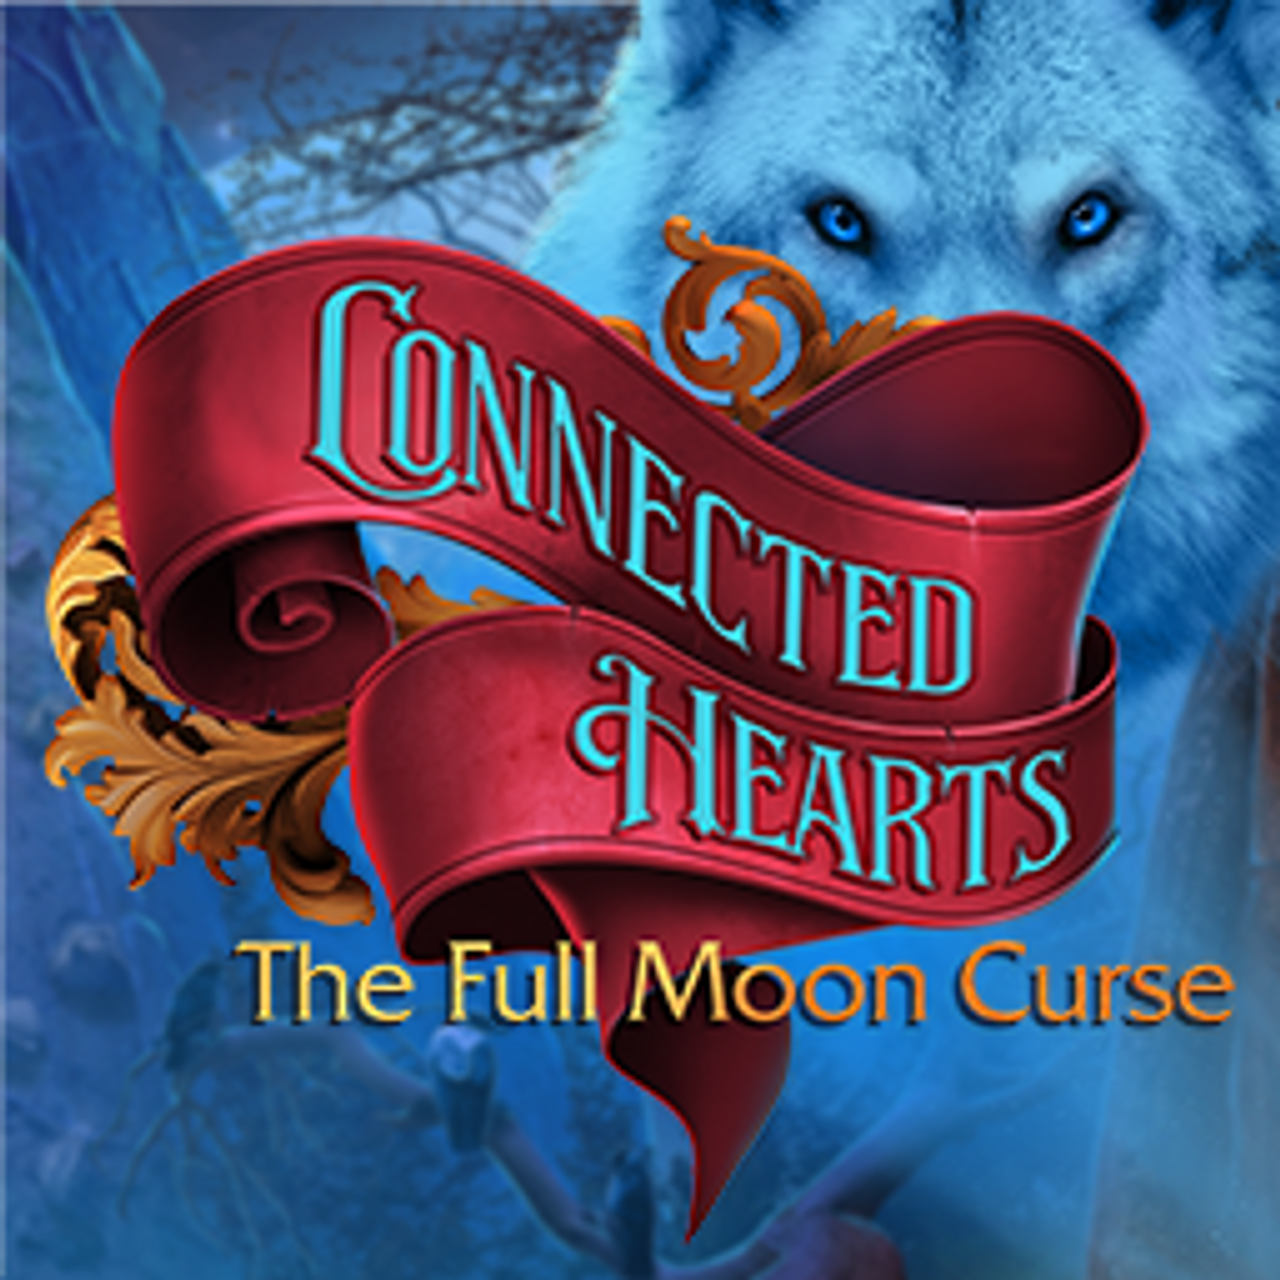 Connected Hearts: The Full Moon Curse